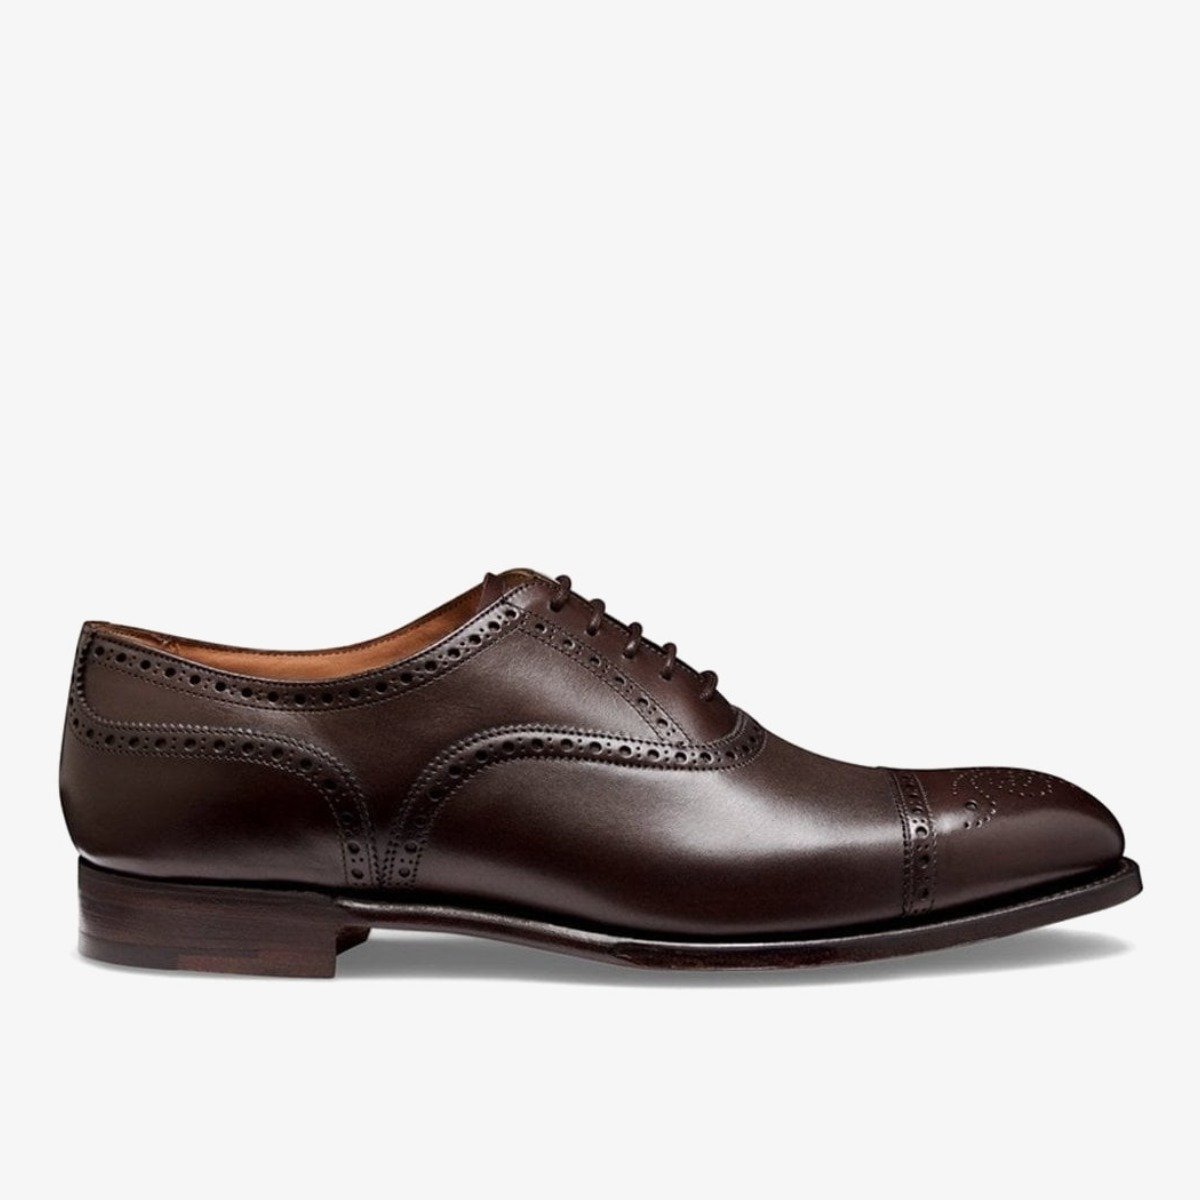 Cheaney Wilfred mocha brogue oxford shoes